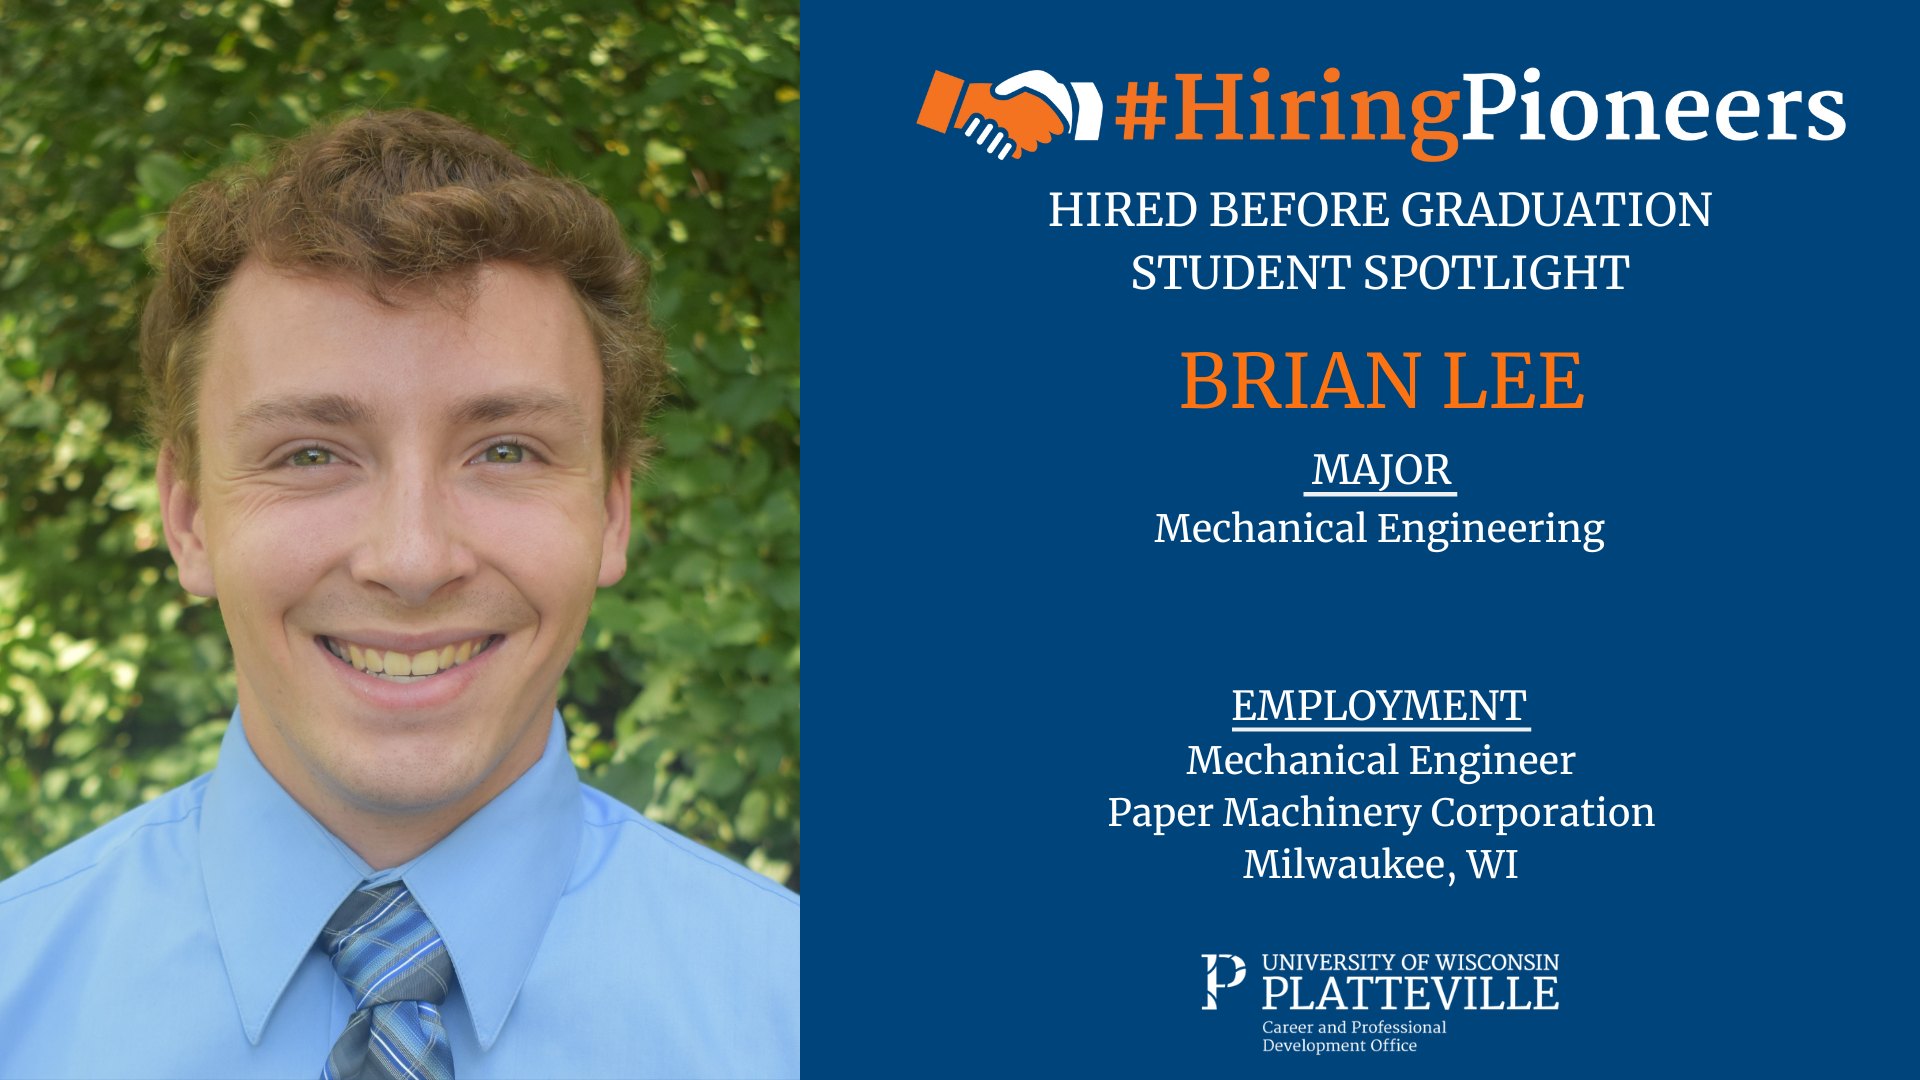 Brian Lee, Hired Before Graduation